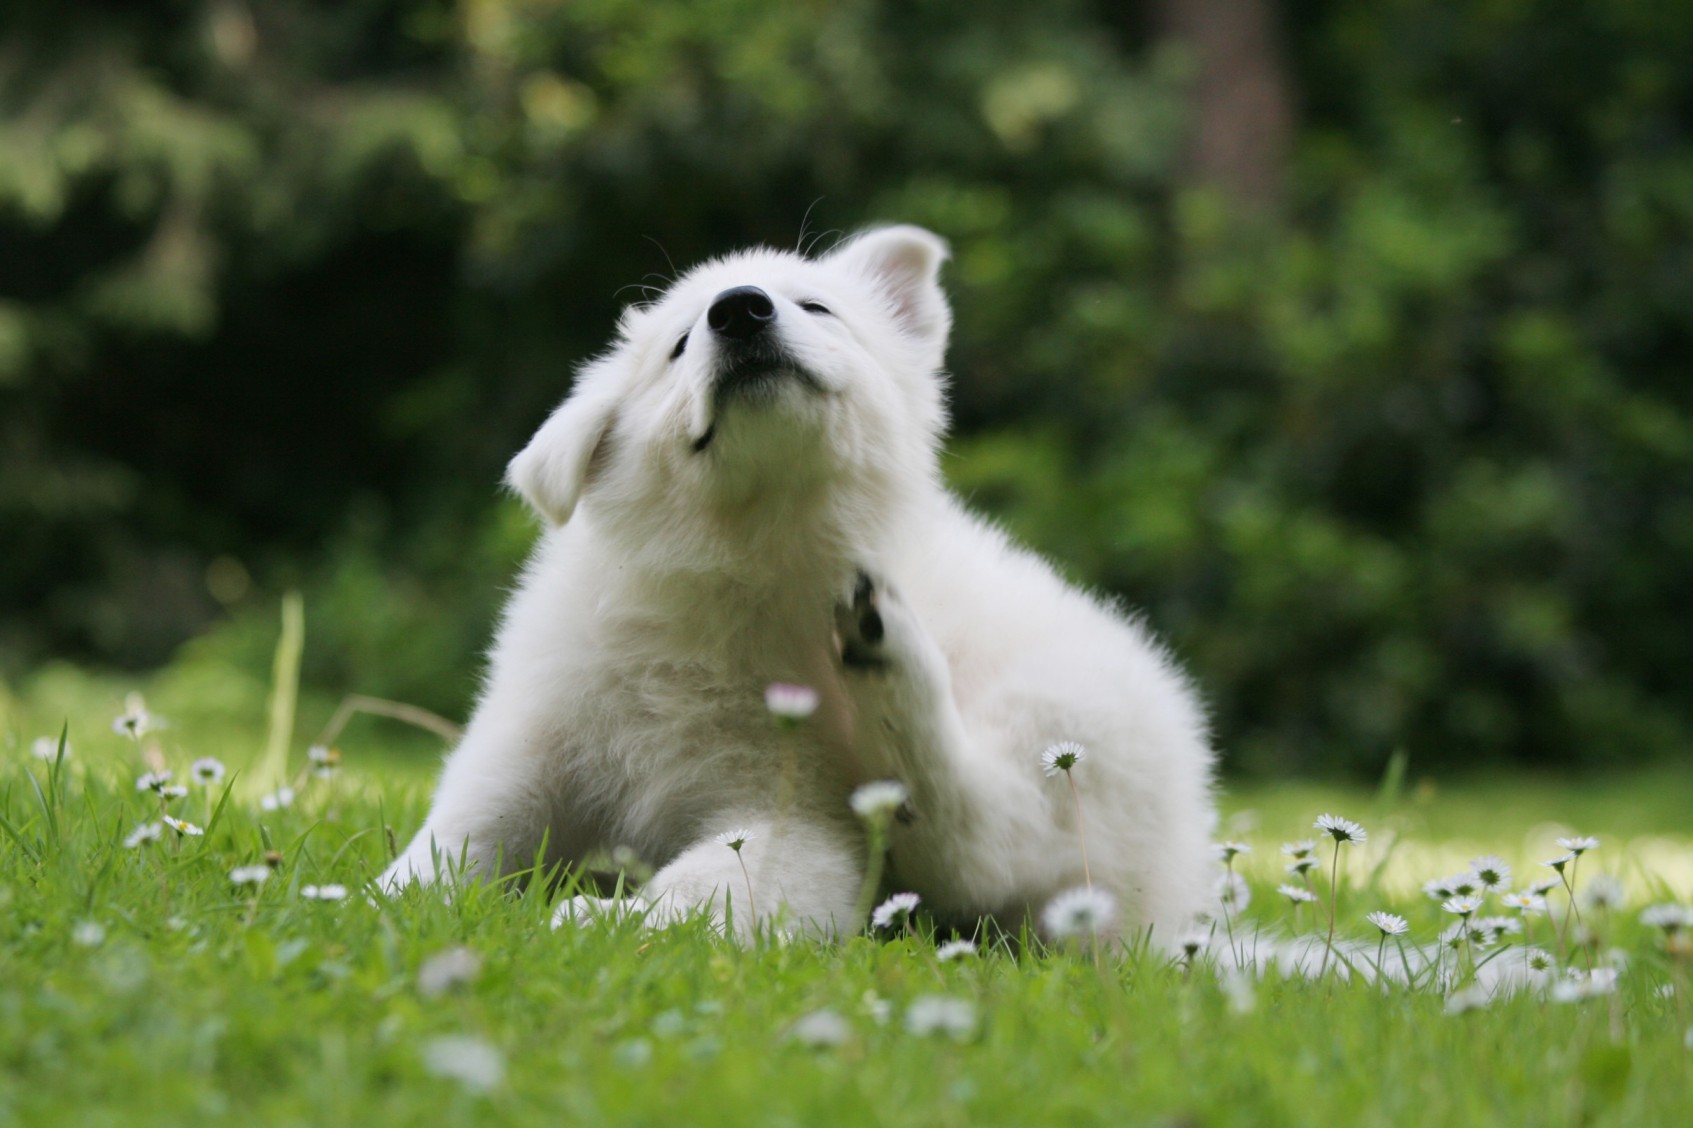 A small white dog scratching themselves in a field of dandelions